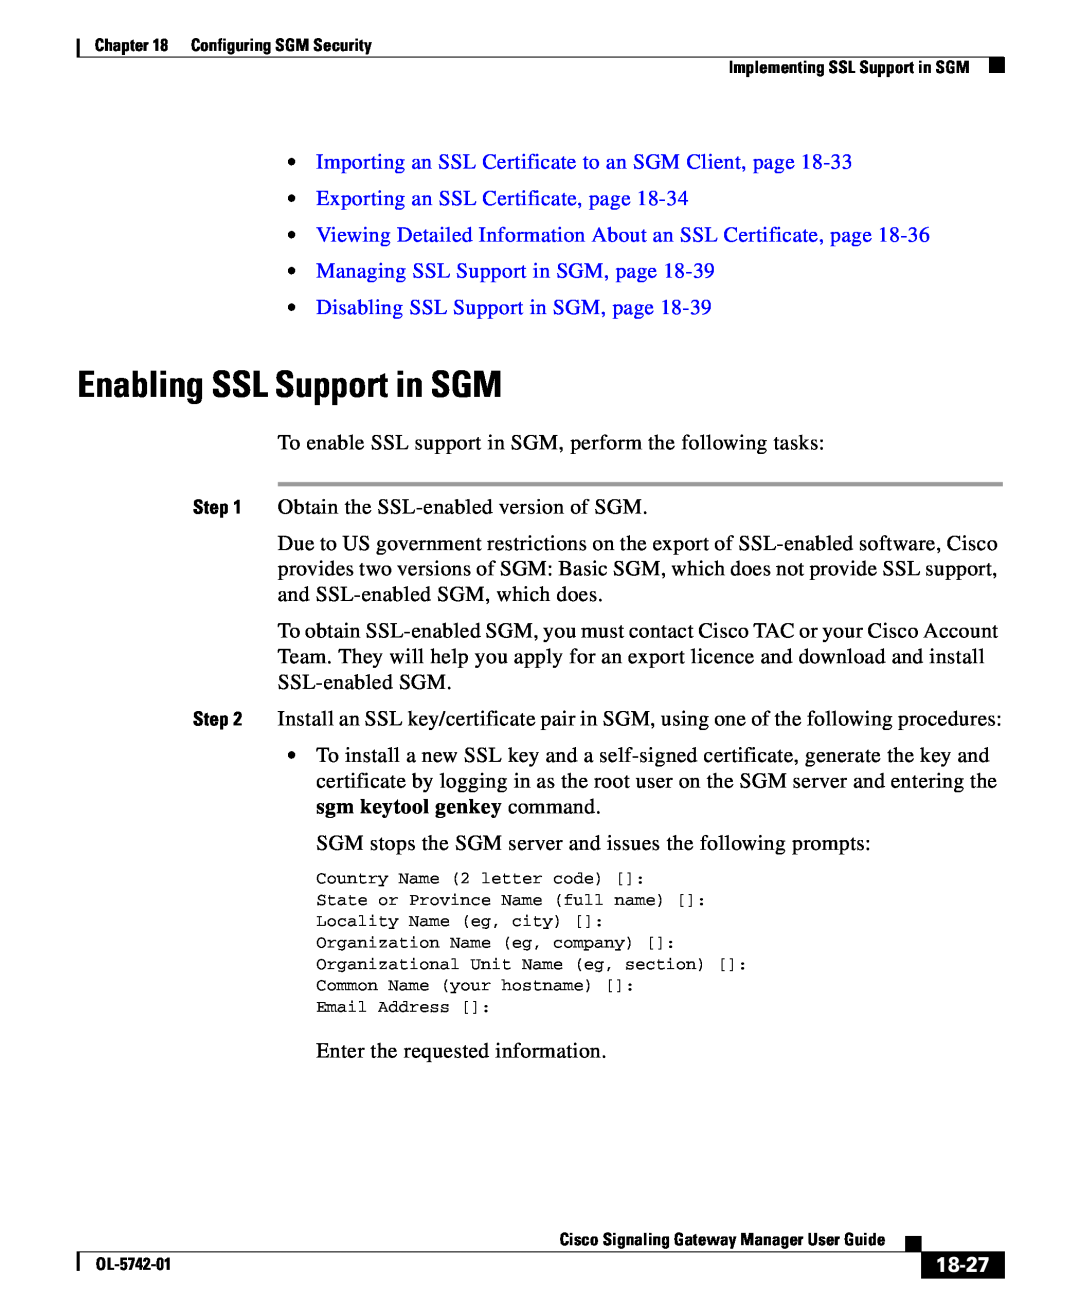 Cisco Systems OL-5742-01 manual Enabling SSL Support in SGM, Exporting an SSL Certificate, page, 18-27 